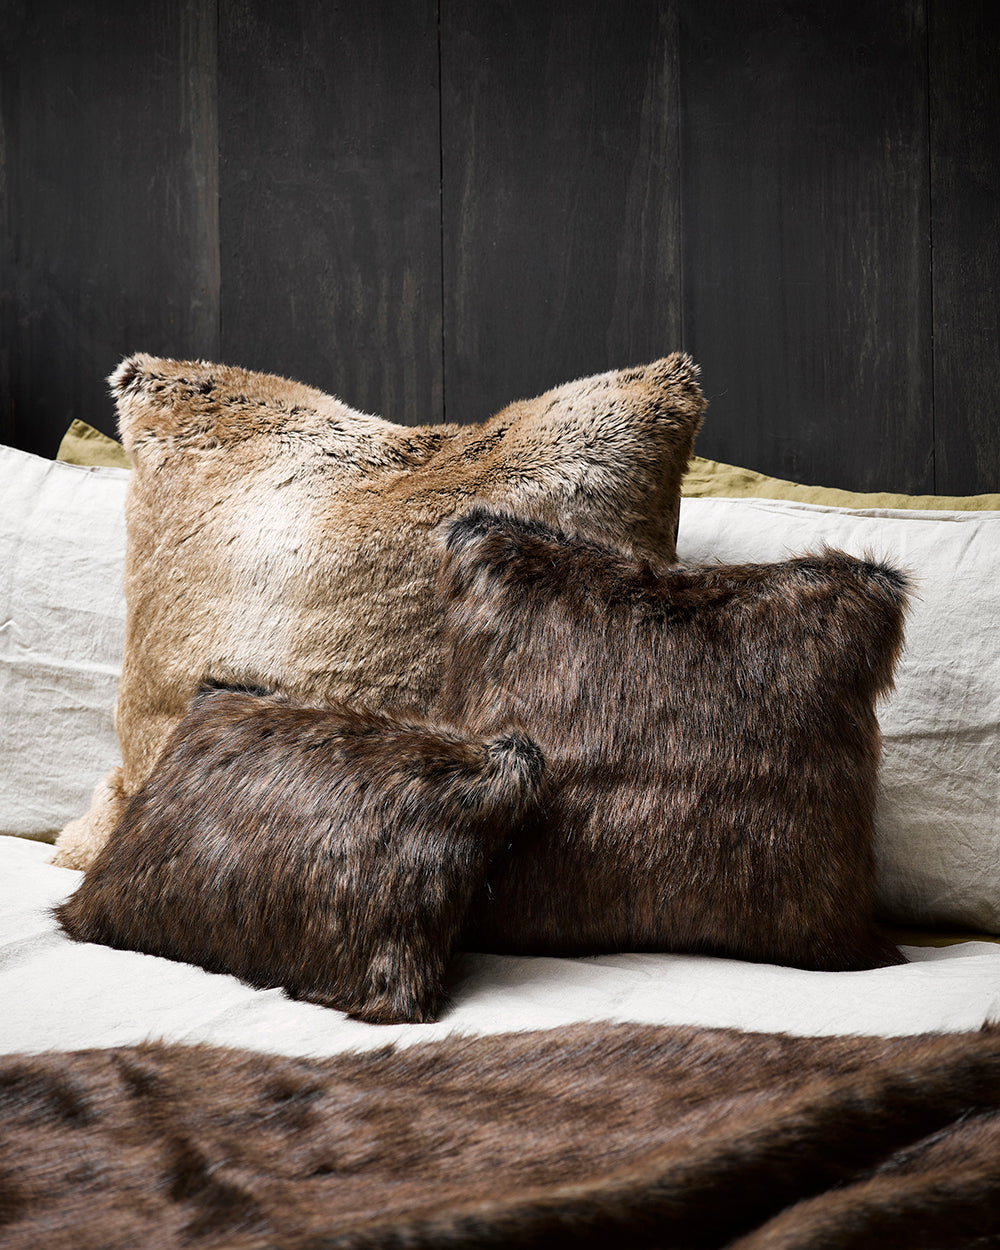 Heirloom Striped Elk Cushions in Faux Fur are available from Make Your House A Home Premium Stockist. Furniture Store Bendigo, Victoria. Australia Wide Delivery. Furtex Baya.